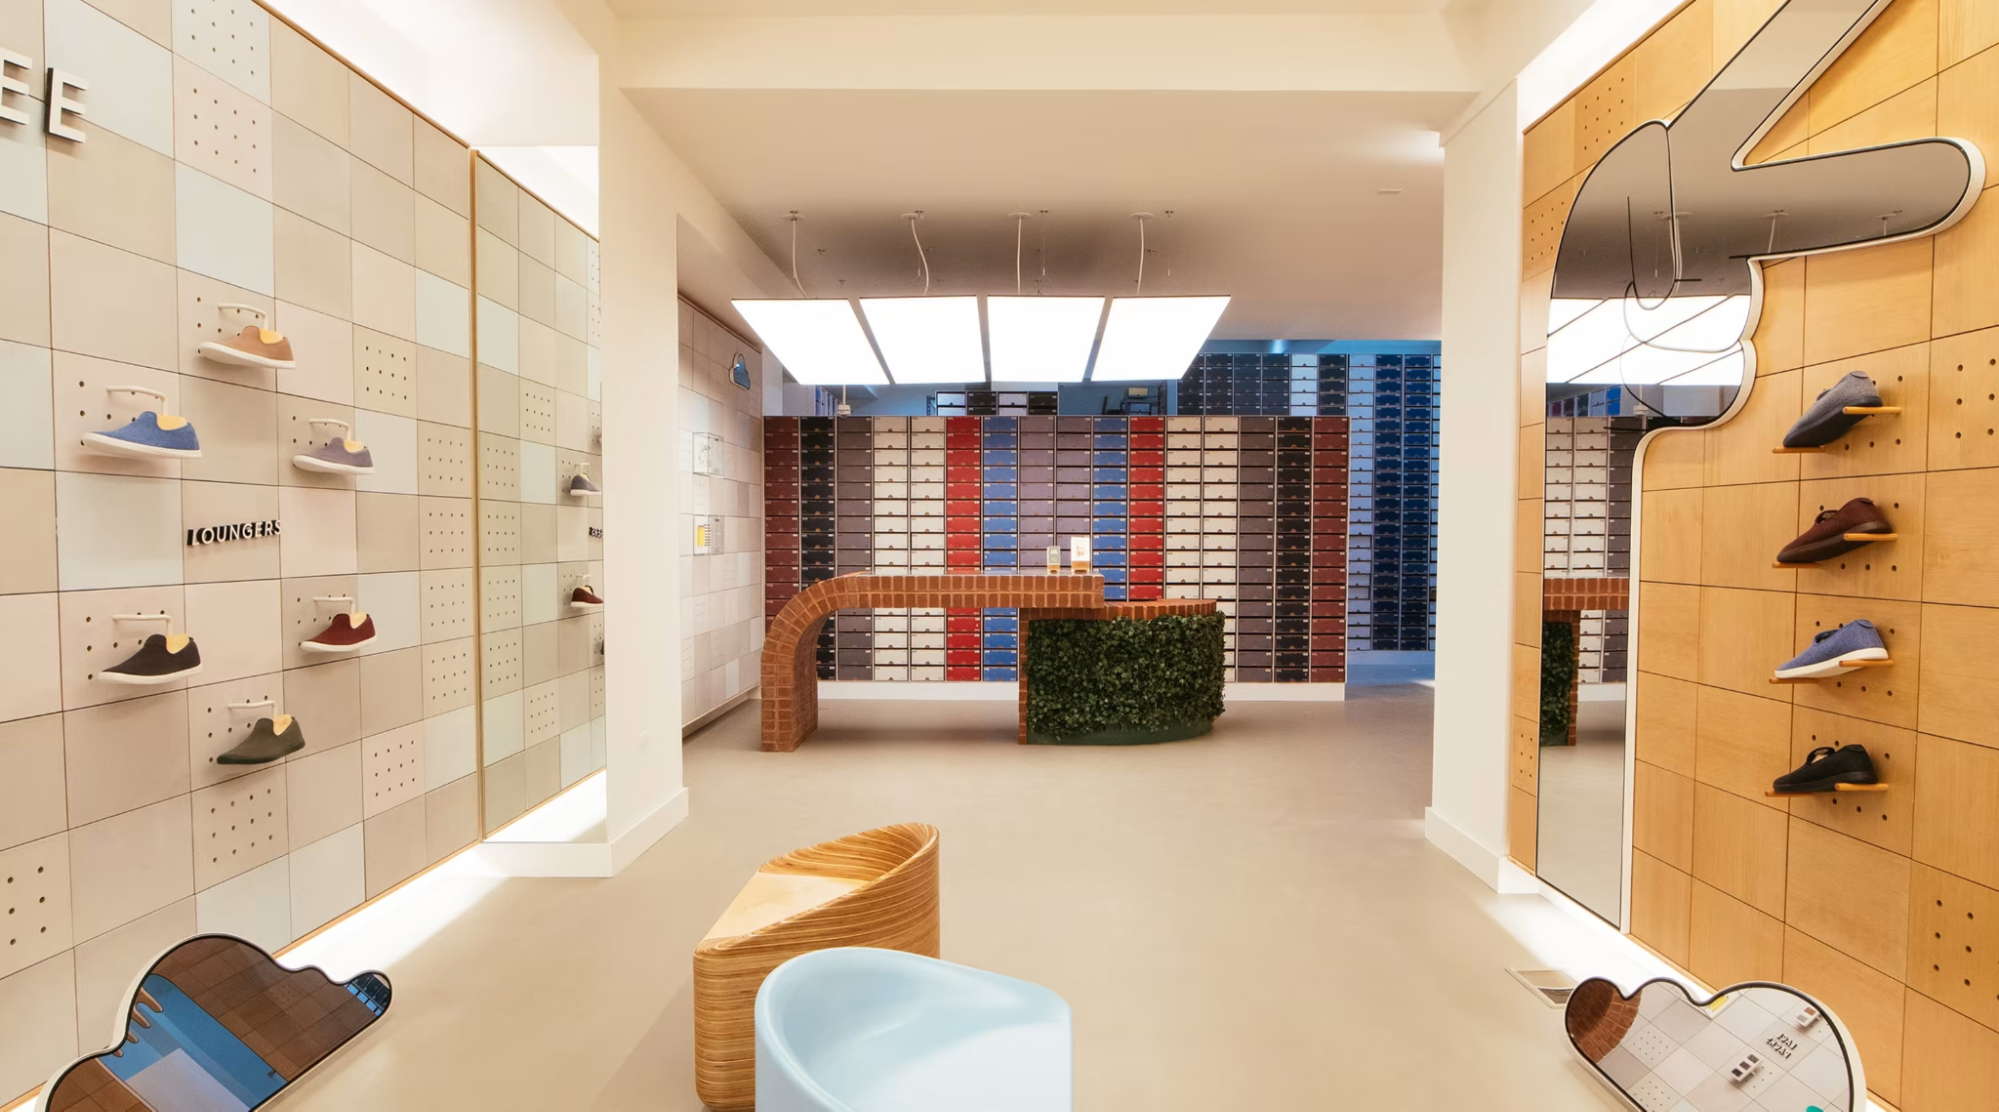 Allbirds Chicago Lincoln Park location has a similar design to its other retail stores, creating a consistent and familiar experience for shoppers regardless of where they’re at. (Source)